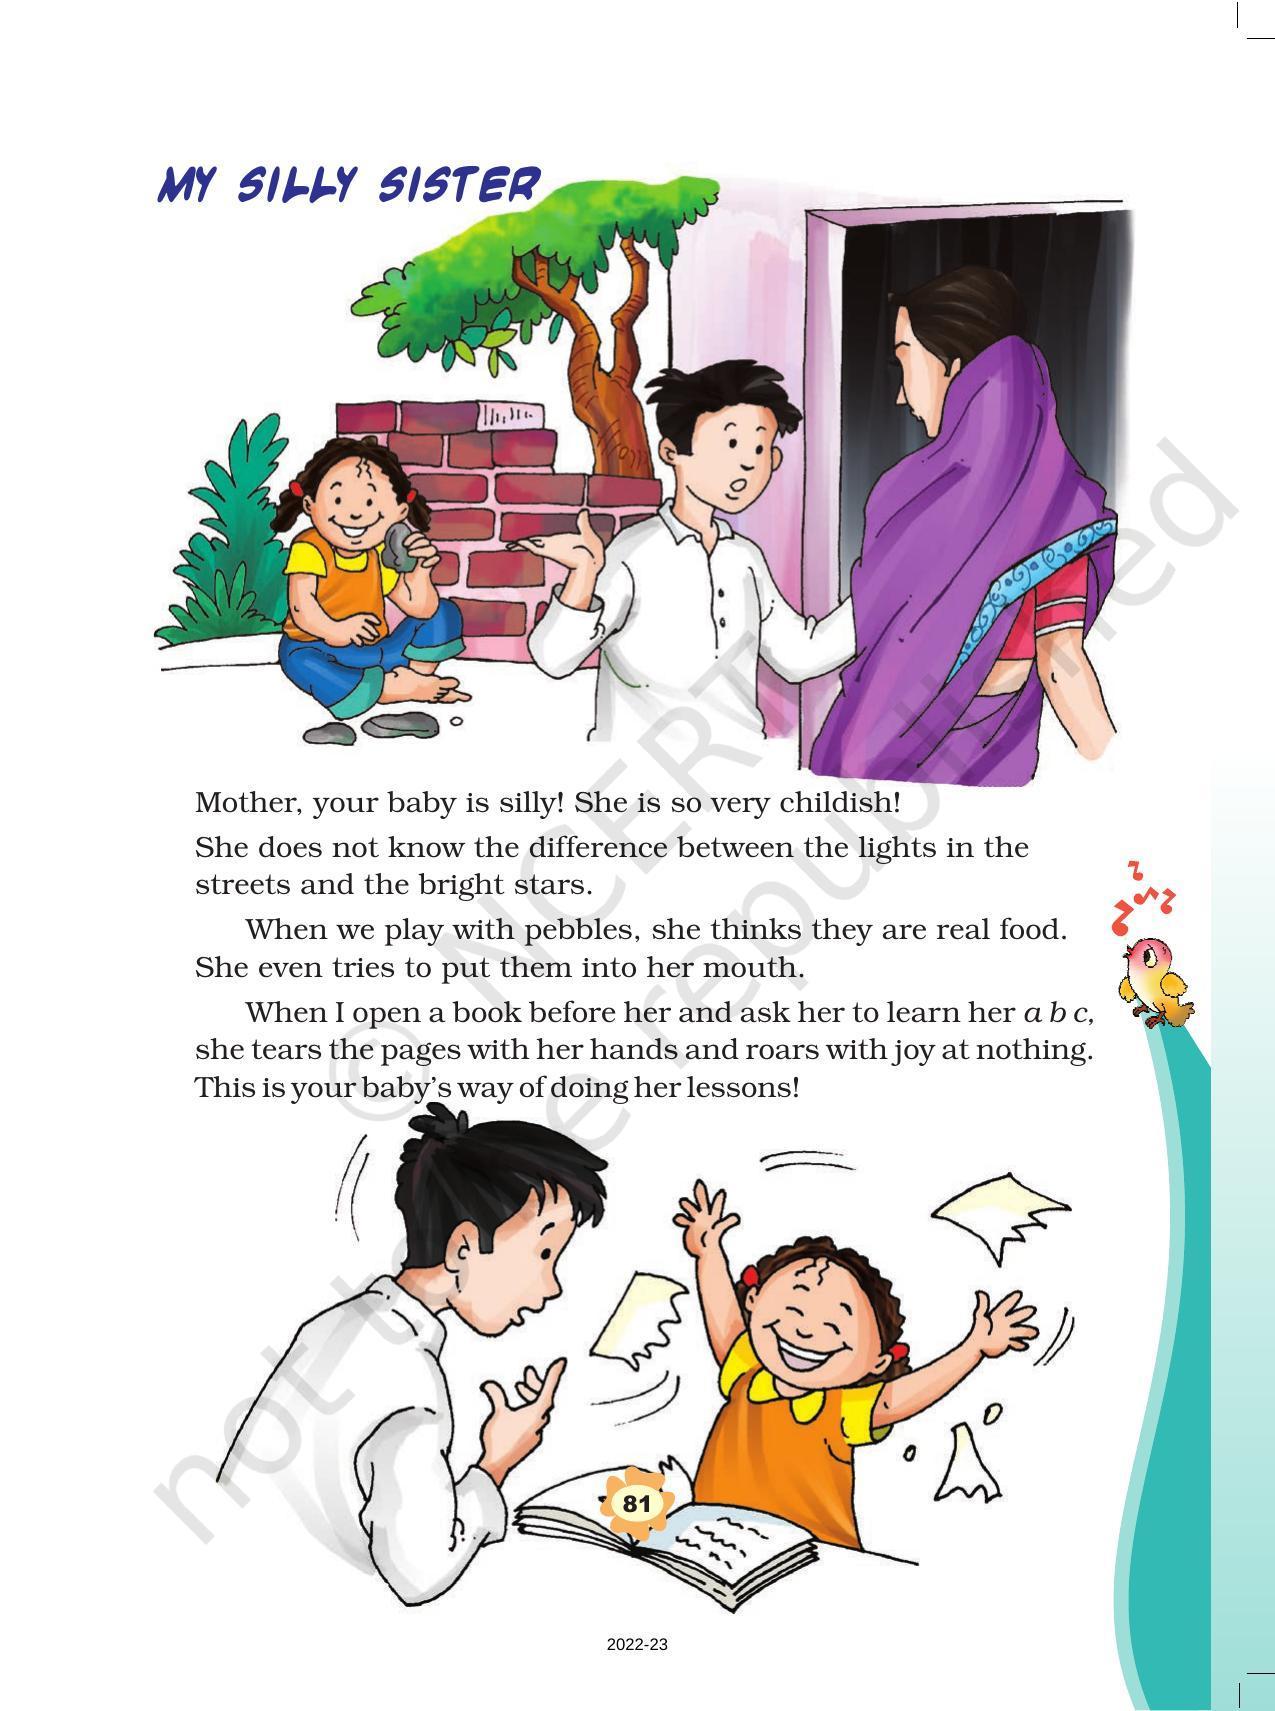 NCERT Book for Class 3 English: Unit VIII.1-What’s in the Mailbox? - Page 5